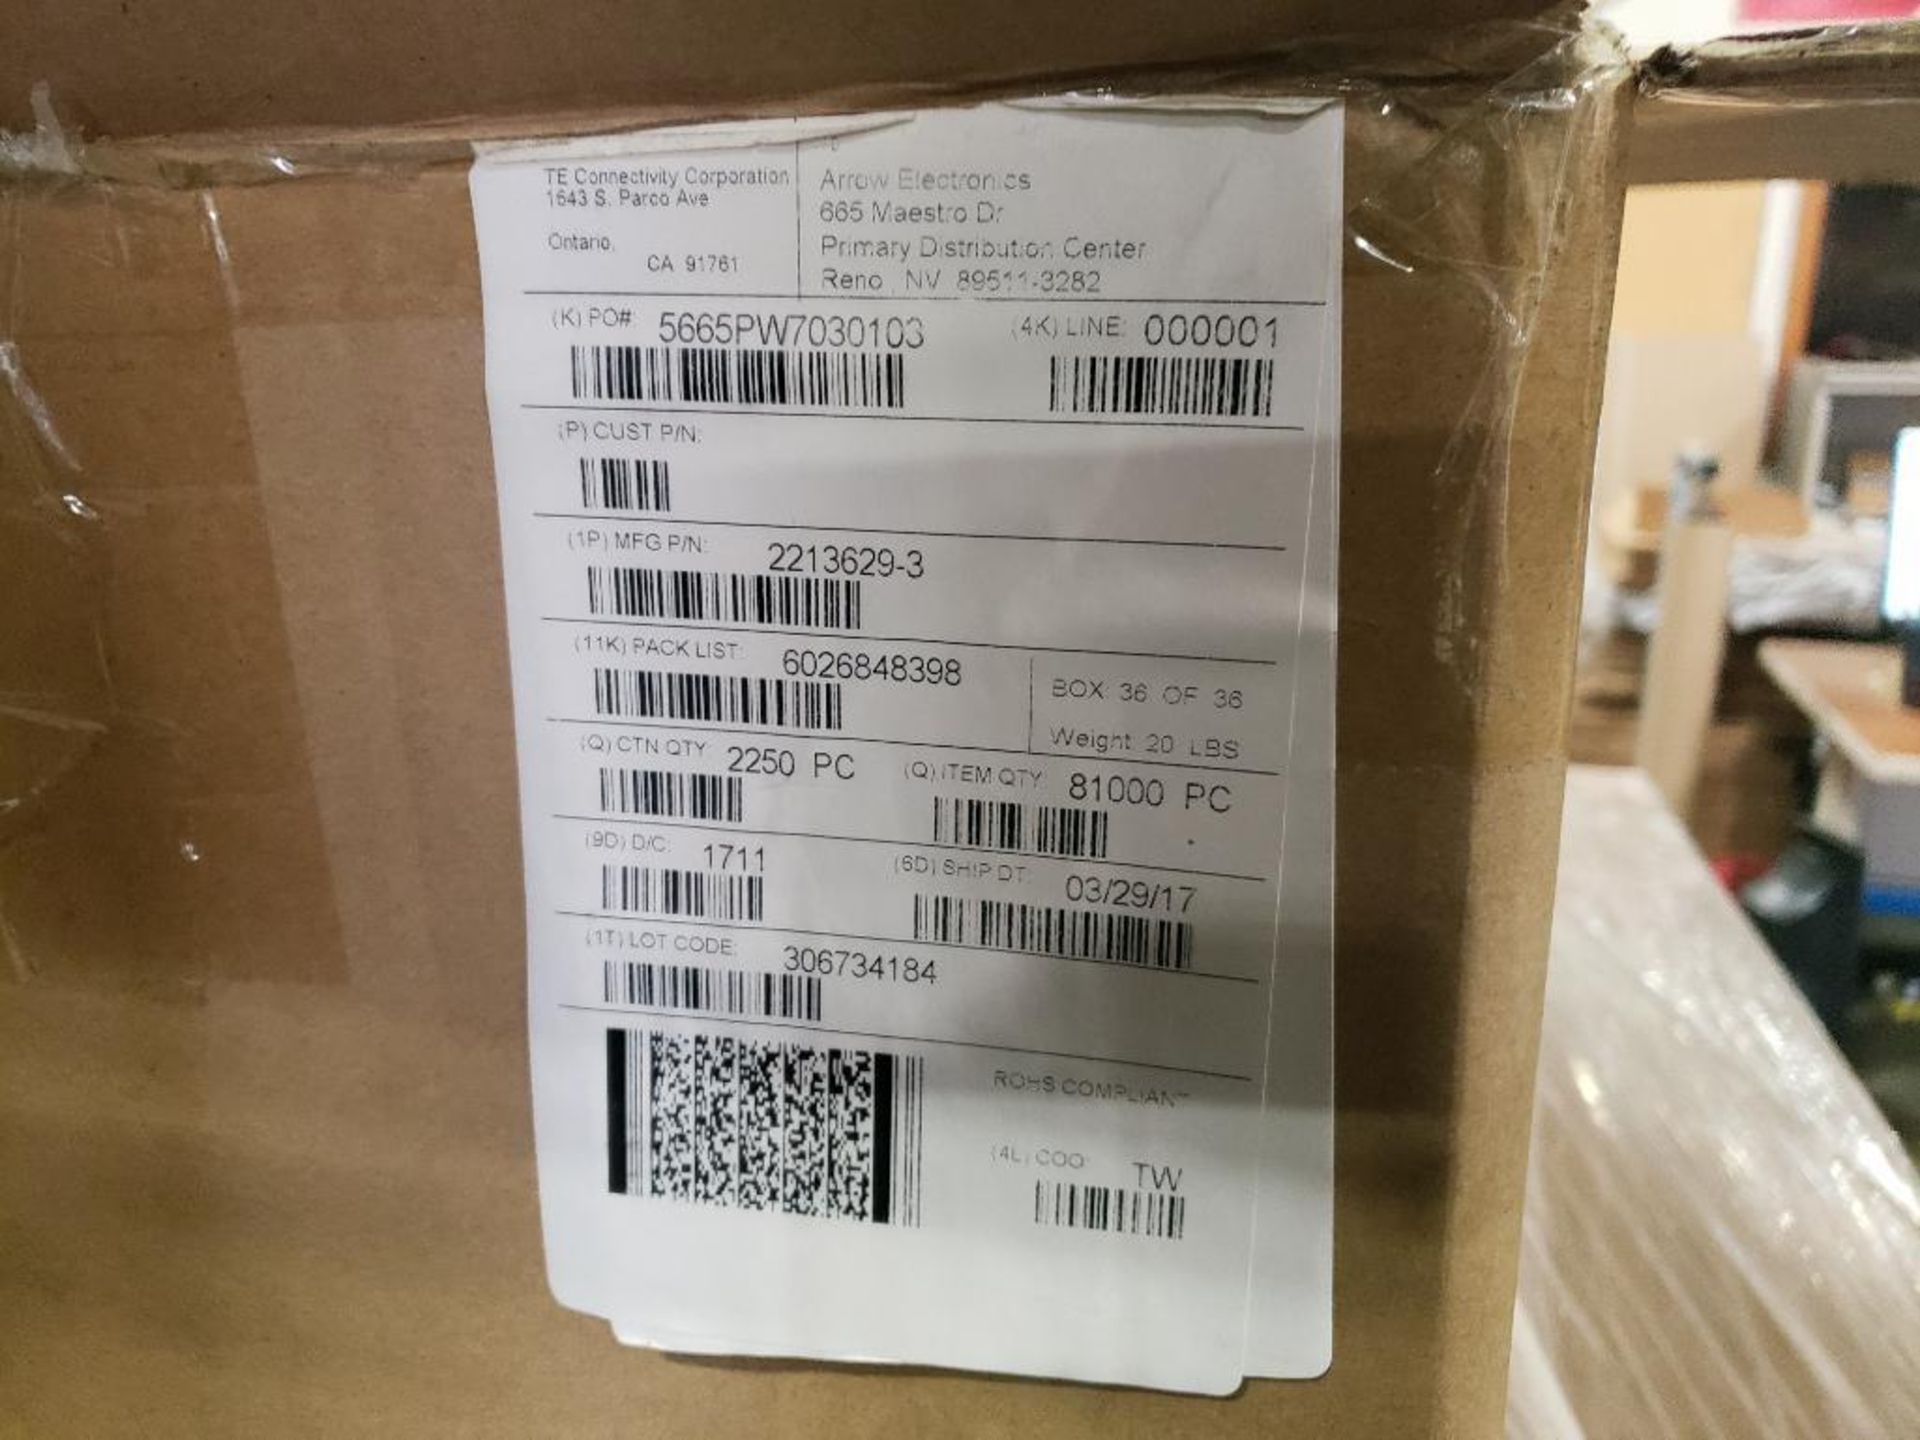 Qty 9000 - TE Connectivity part number 2213629-3. (4 bulk boxes of 9 reels) - Image 6 of 12